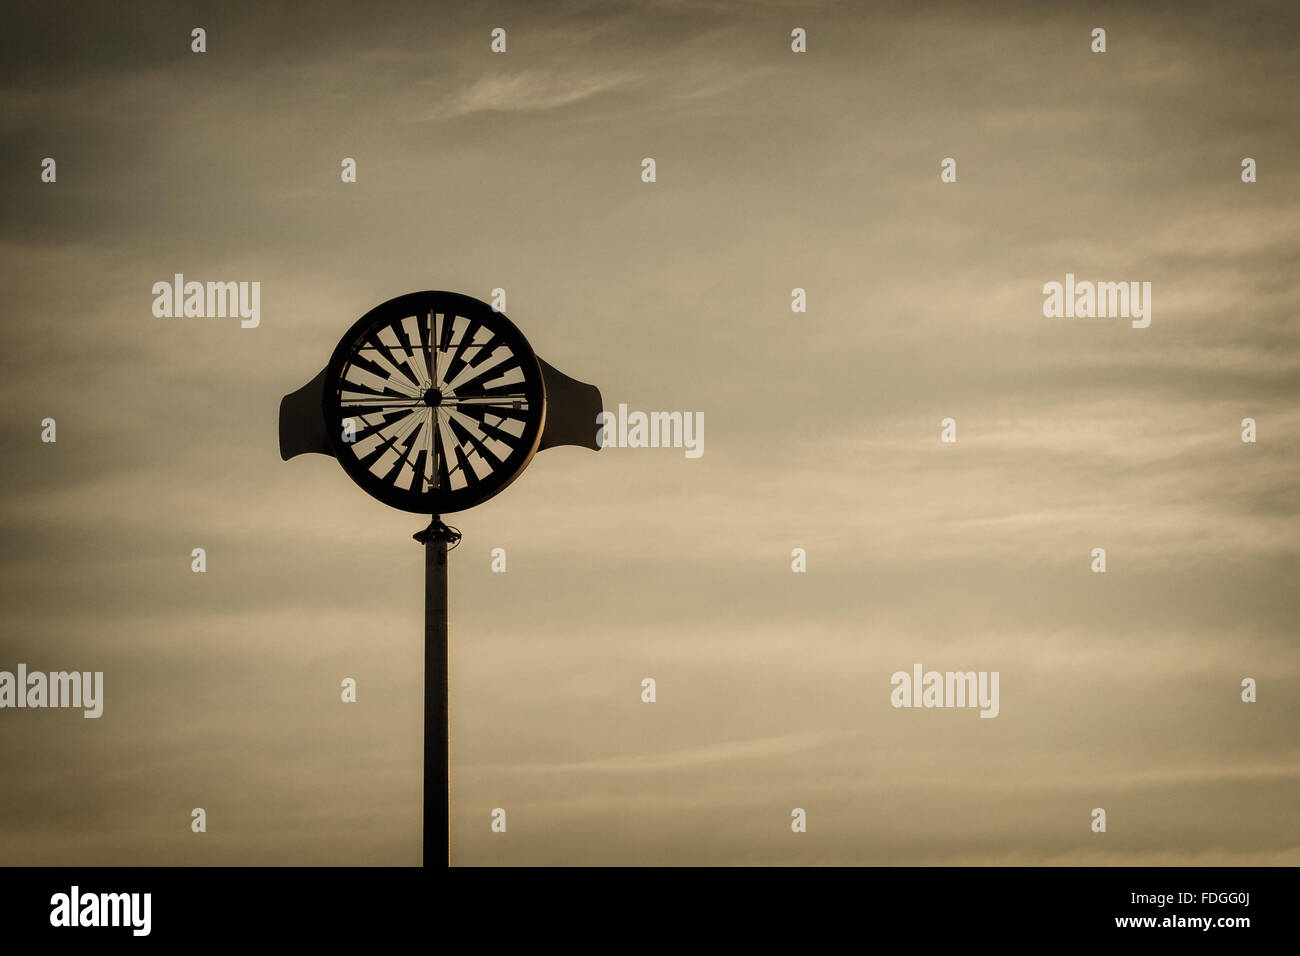 Artistic anemometer against the warm sky of sunrise on an overcast day Stock Photo